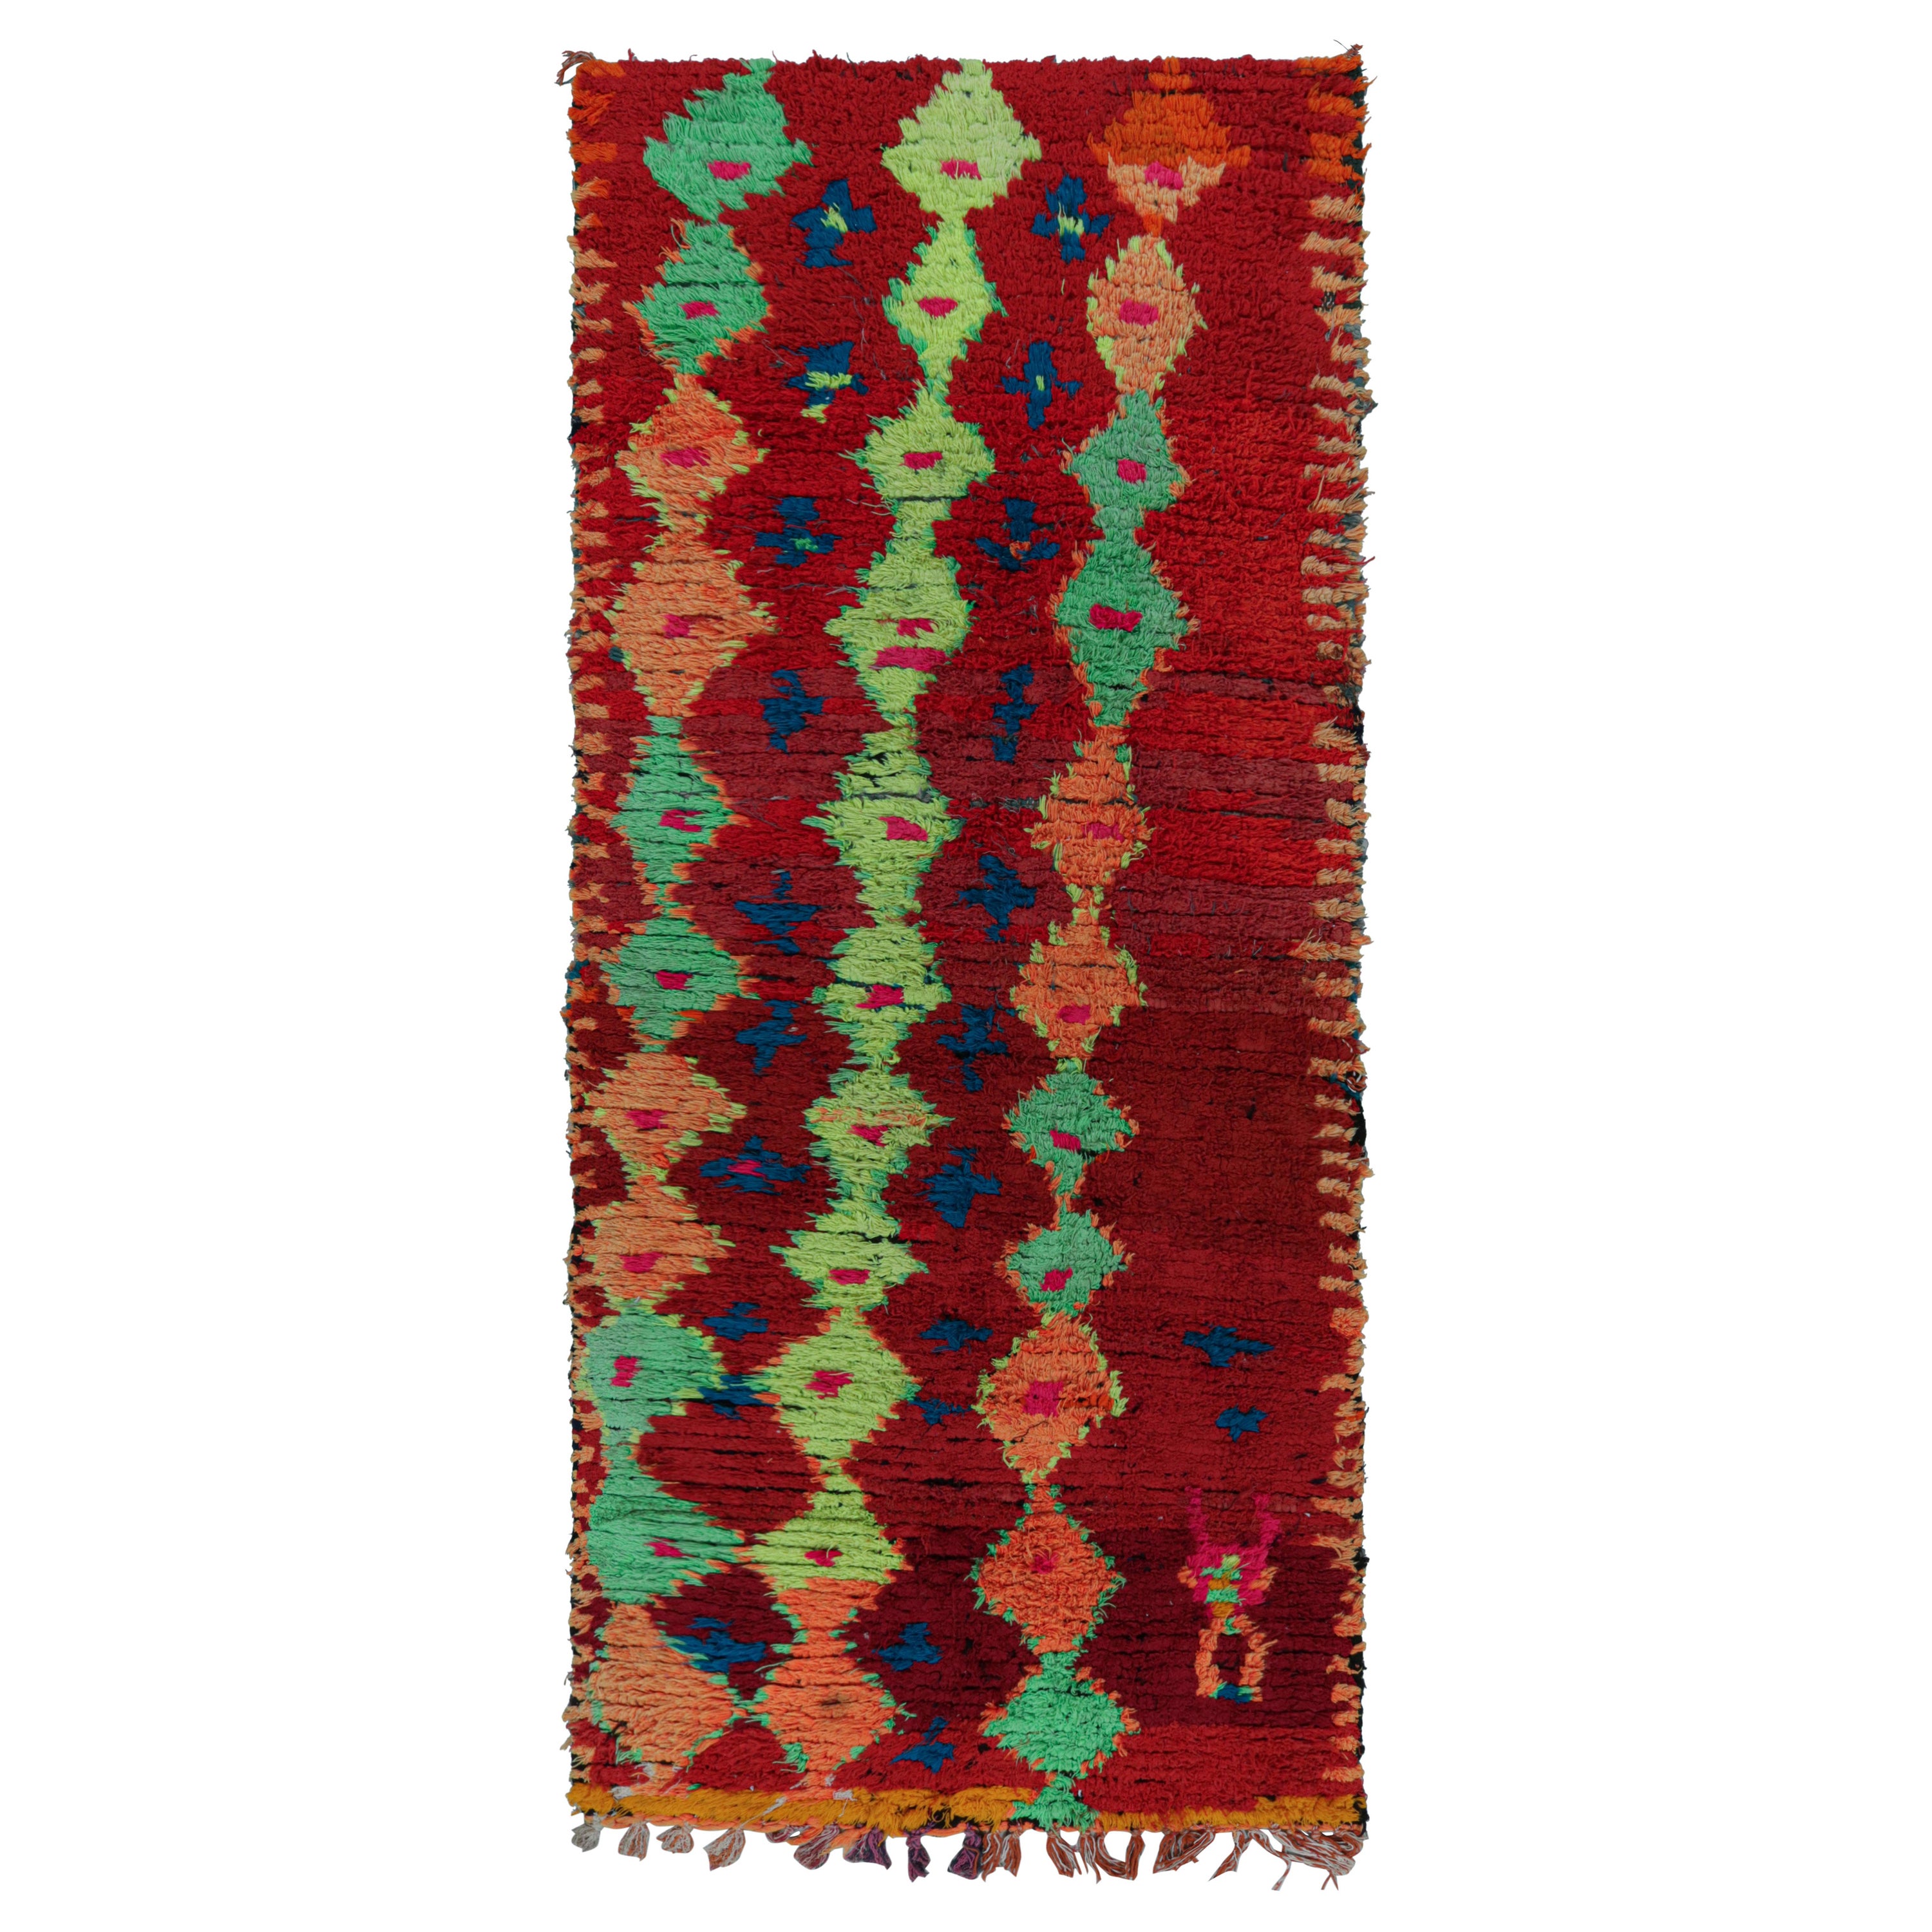 Vintage Moroccan Runner Rug in Red with Geometric Patterns, from Rug & Kilim  For Sale